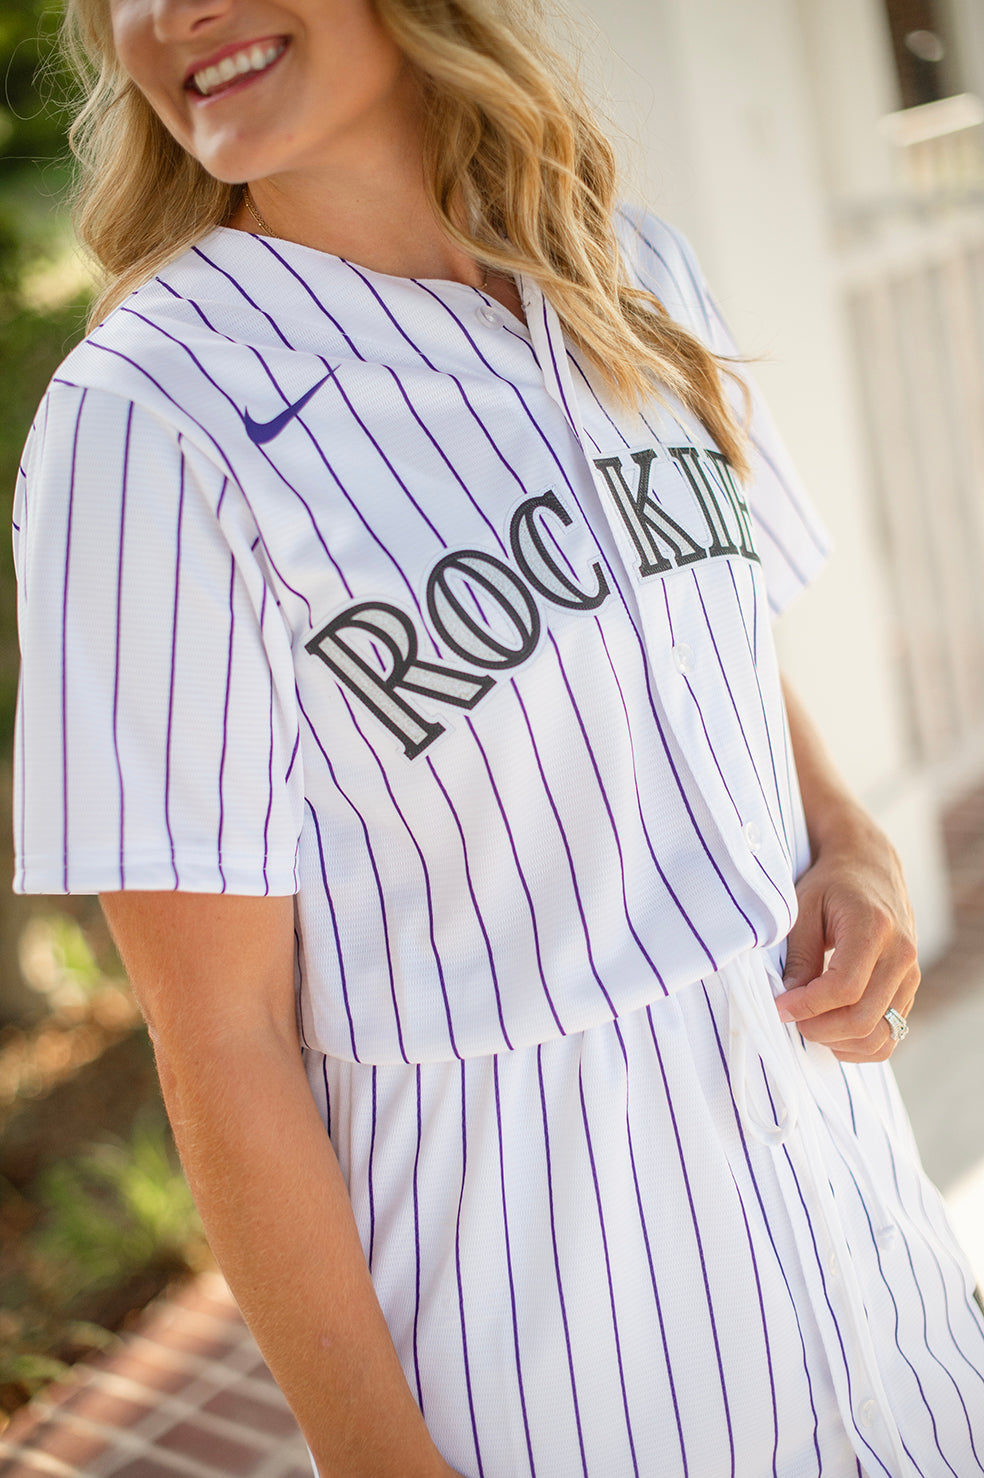 Discounted Women's Colorado Rockies Gear, Cheap Womens Rockies Apparel,  Clearance Ladies Rockies Outfits